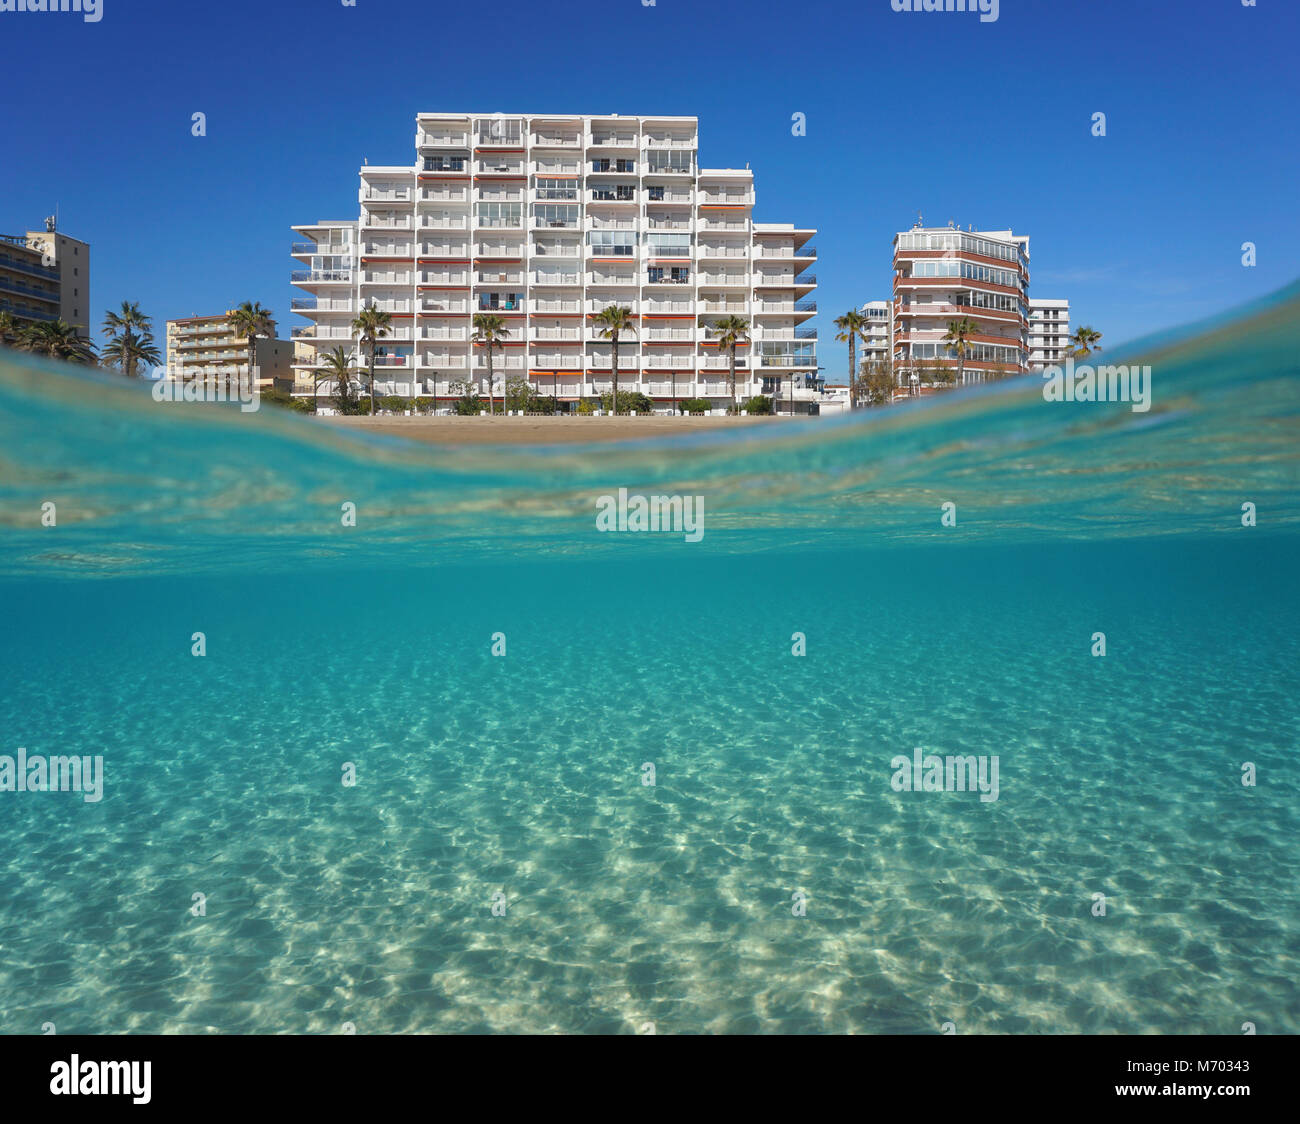 Beachfront apartment building and sandy seabed underwater, split view above and below water surface, Mediterranean sea, Spain, Costa Brava, Catalonia Stock Photo